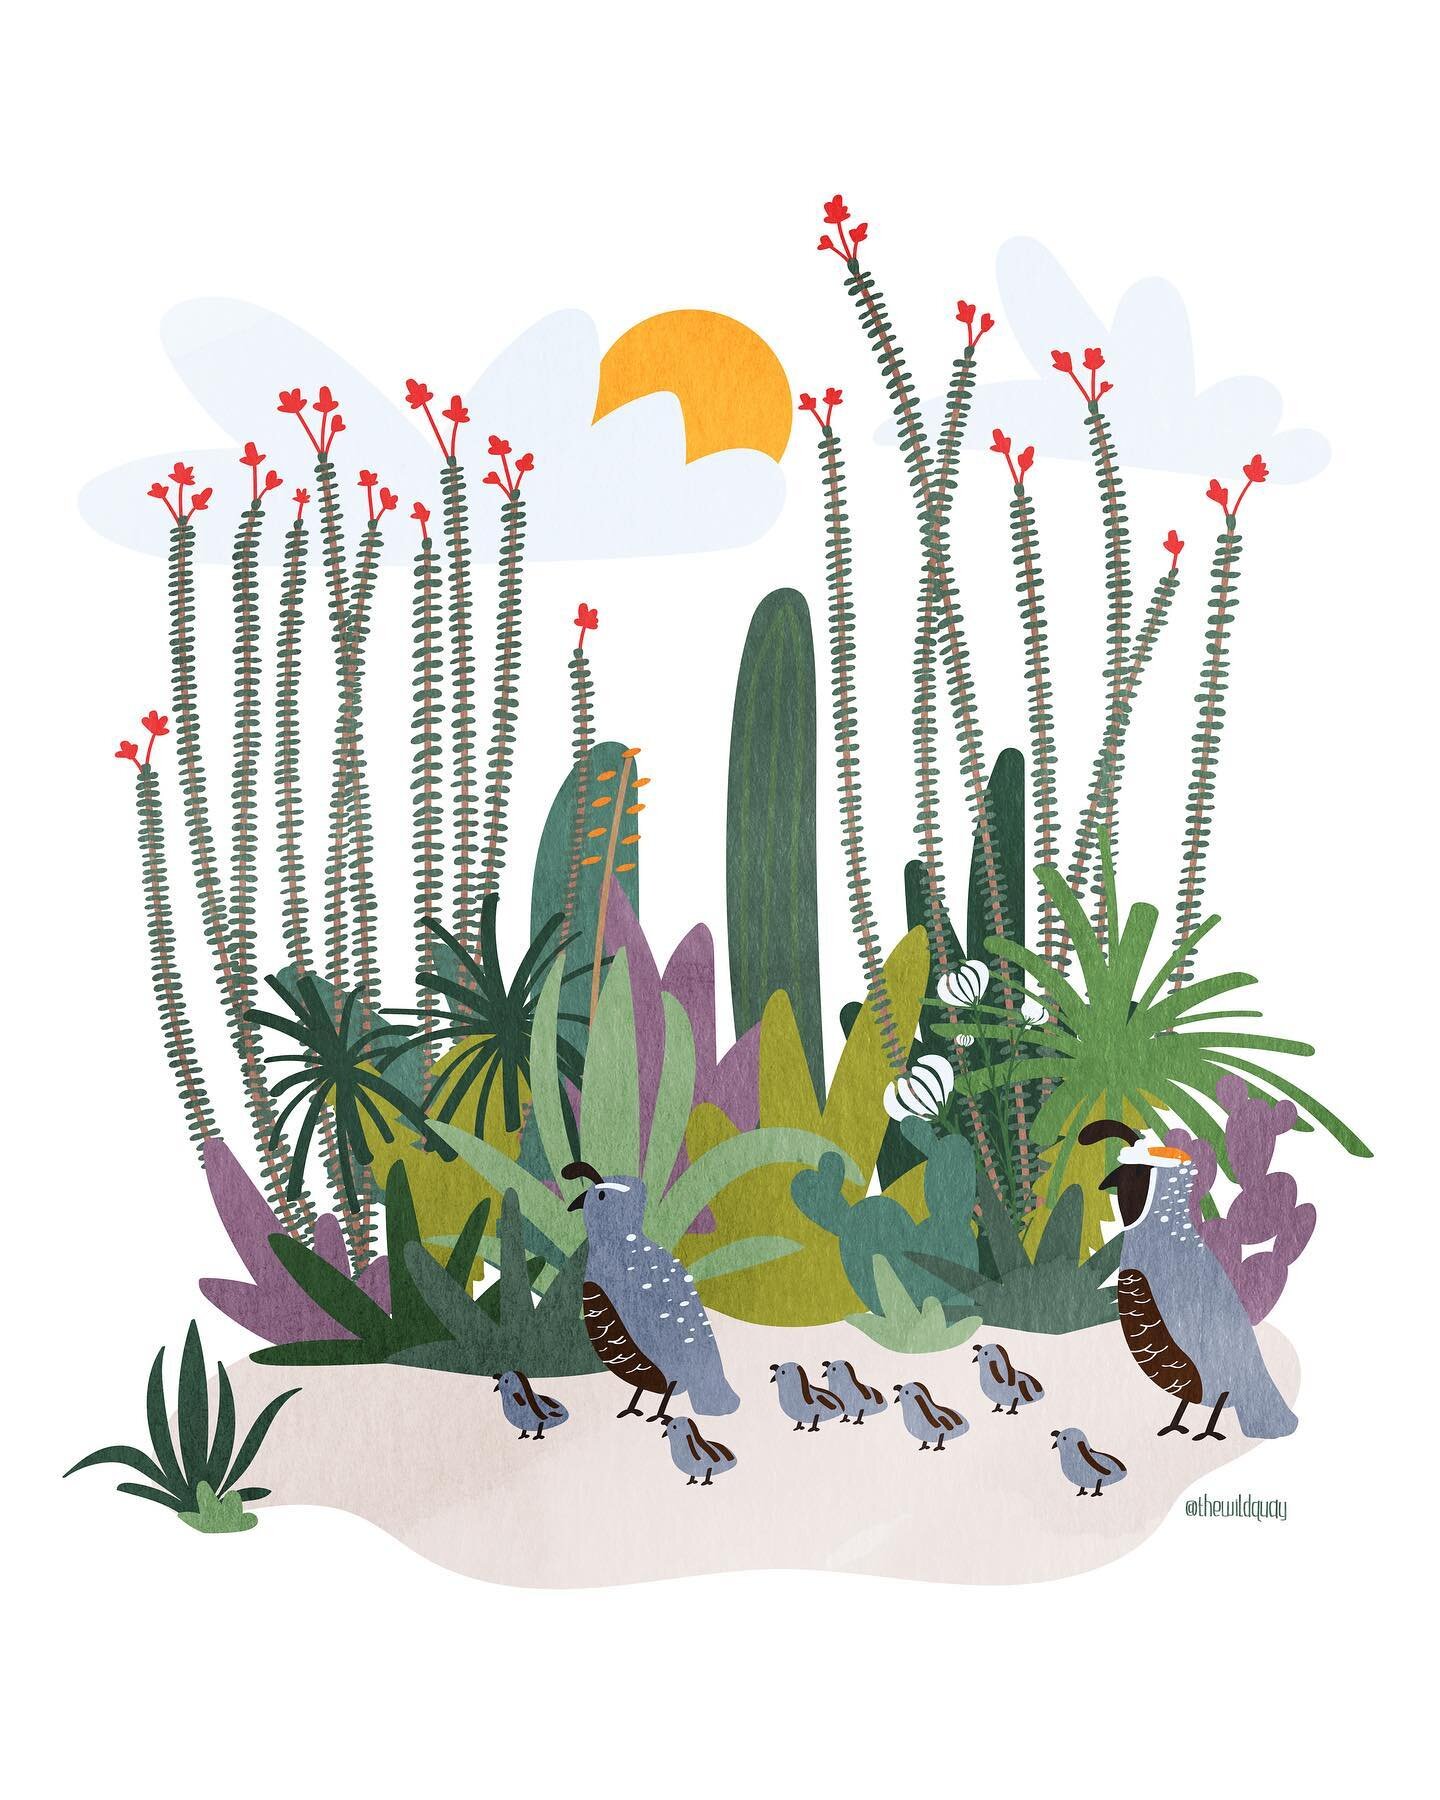 Sunday desert illustrations!

I love quail. Growing up in the desert with a name like Quay, I for some reason thought I was more connected to them than anyone one else &ndash; made sense as a kid, I swear 😂

We had them in my yard all the time and I